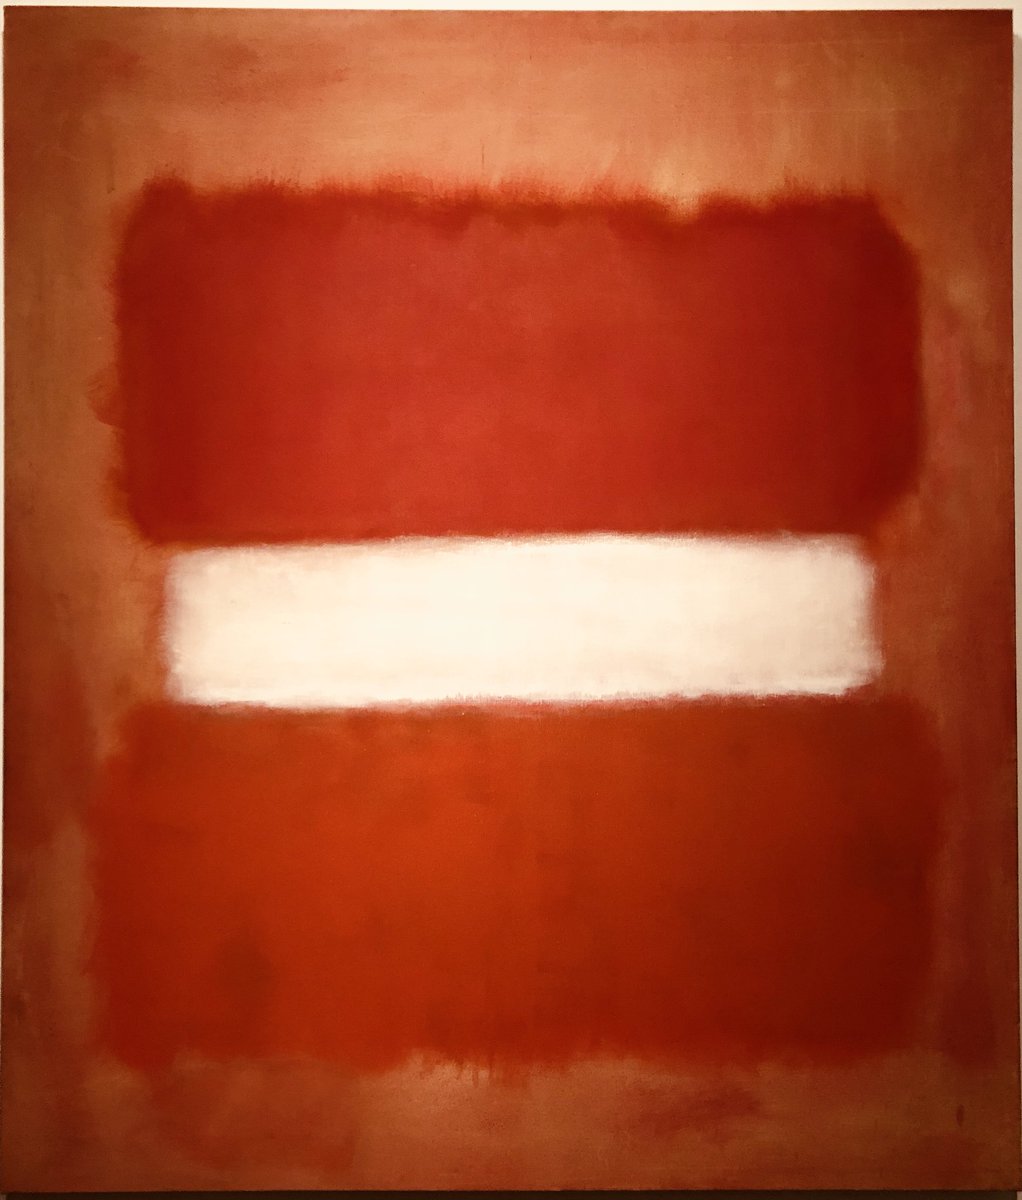 No. 8 White Stripe by Mark Rothko (1903 –1970) is another favorite, he has a work “White Center” that is at LACMA, knocks me out every time, although there is no bad Rothko’s.